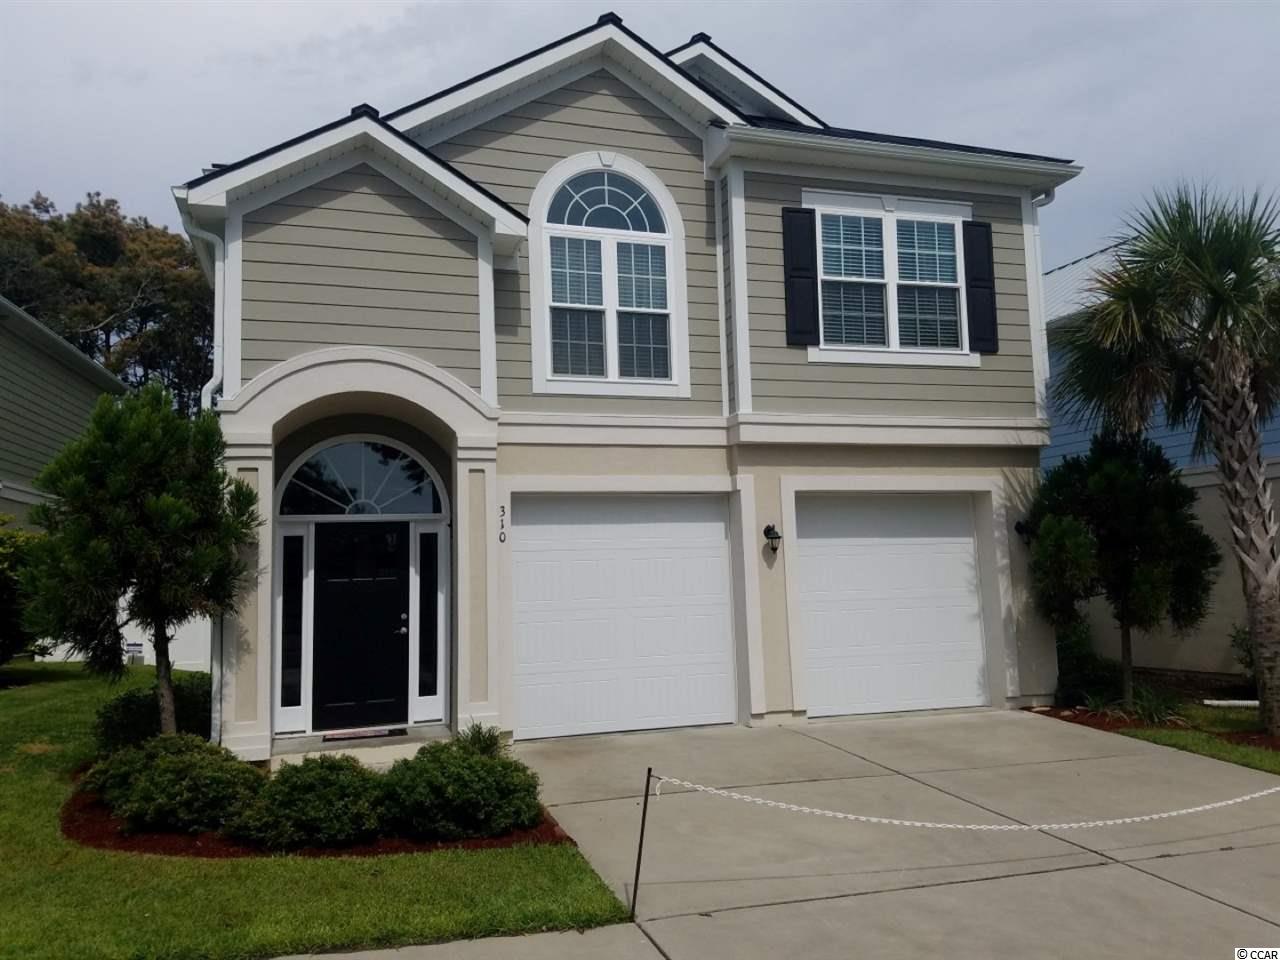 310 7th Ave. S North Myrtle Beach, SC 29582